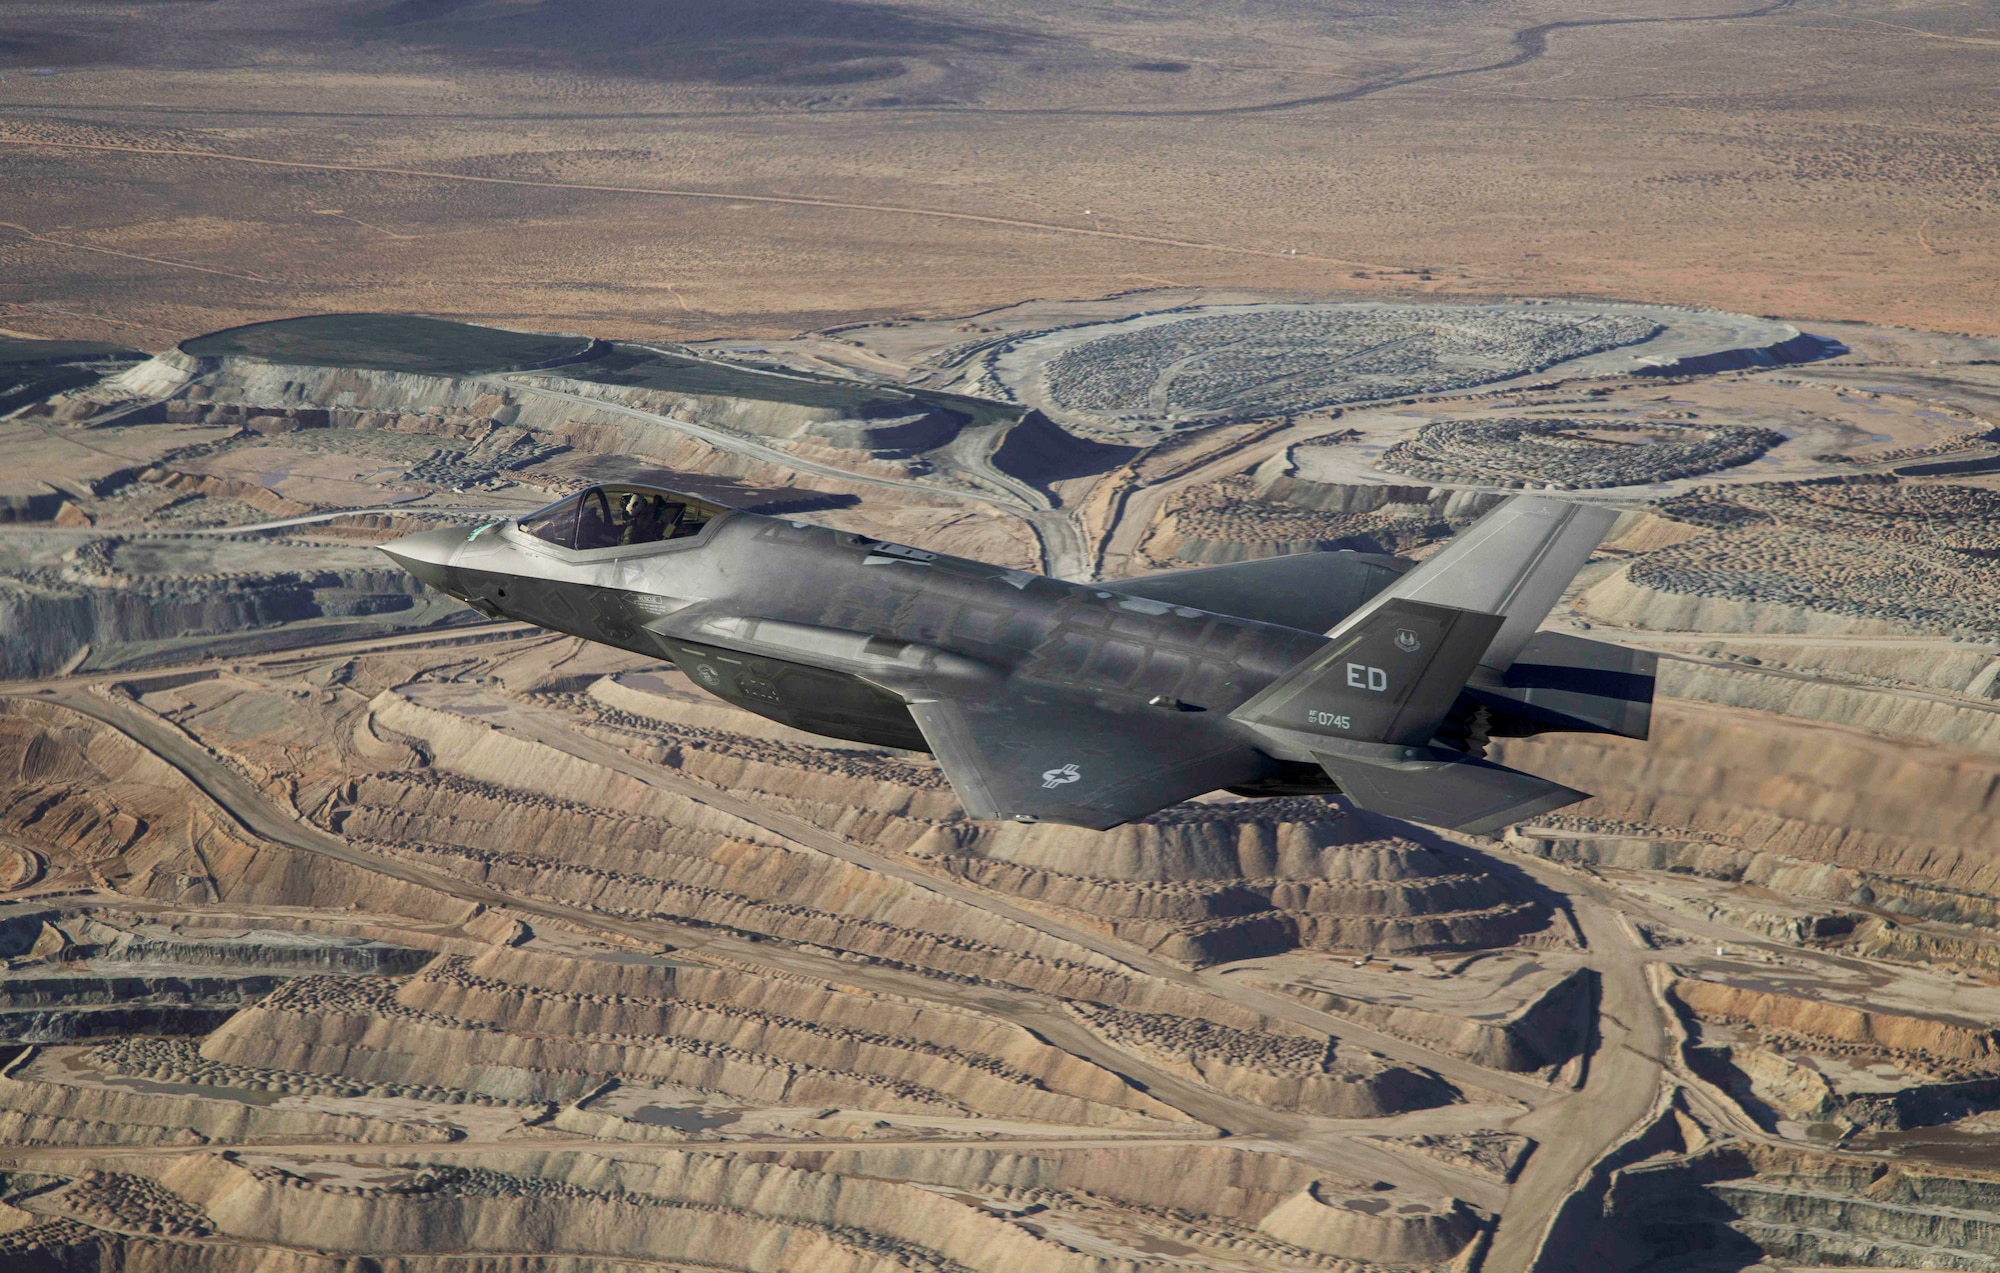 An F-35A, in flight above the Mojave Desert in California, January 6, 2023. A developmental test team from the 461st Flight Test Squadron conducted the first flight of an F-35 in the Technology Refresh 3 (TR-3) configuration at Edwards Air Force Base, California. The 50-minute flight, which took the jet to 35,000 feet at speeds just shy of the speed of sound above the desert, marked the start of an extensive flight test campaign. TR-3 provides the computational horsepower to support modernized Block 4 capabilities. The F-35 Joint Program Office is the Department of Defense's focal point for the 5th-generation strike aircraft for the Navy, Air Force, Marines, and our allies. The F-35 is the premier multi-mission, 5th-generation weapon system. Its ability to collect, analyze and share data is a force multiplier that enhances all assets in the battle space: with stealth technology, advanced sensors, weapons capacity, and range. The F-35 has been operational since July 2015 and is the most lethal, survivable, and interoperable fighter aircraft ever built.